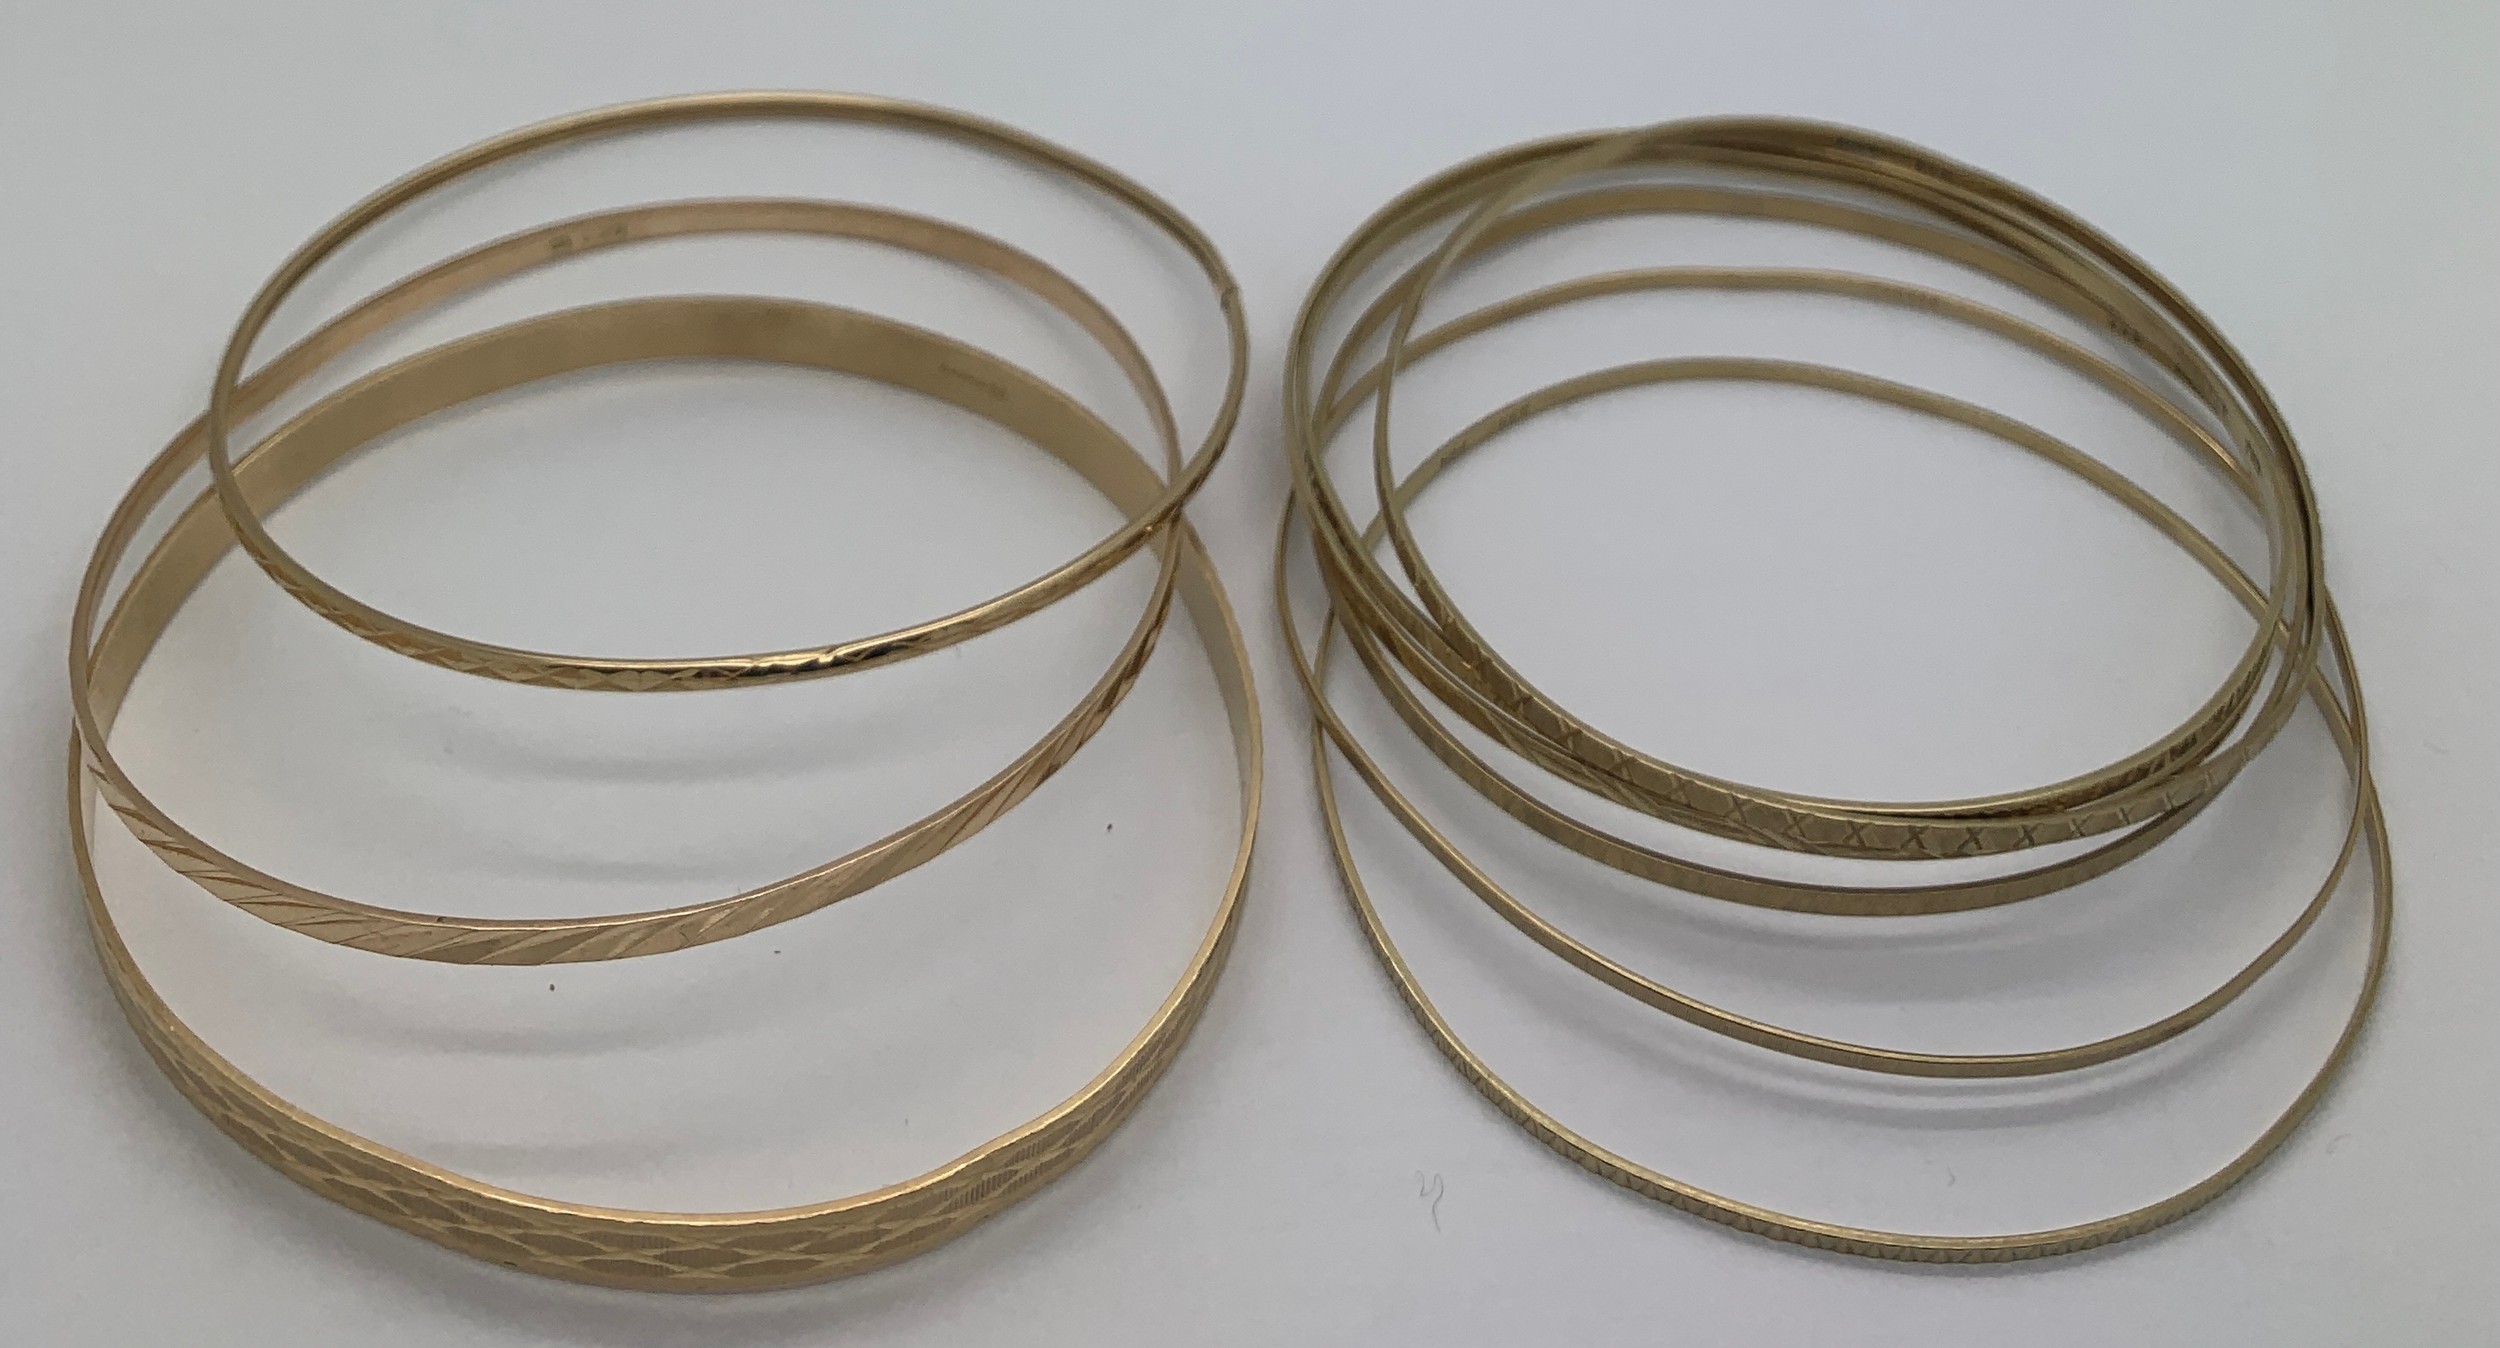 Nine various gold bangles, 6 marked 8ct (16gms) and 3 marked 9ct gold (14.3gms). Total weight 30.